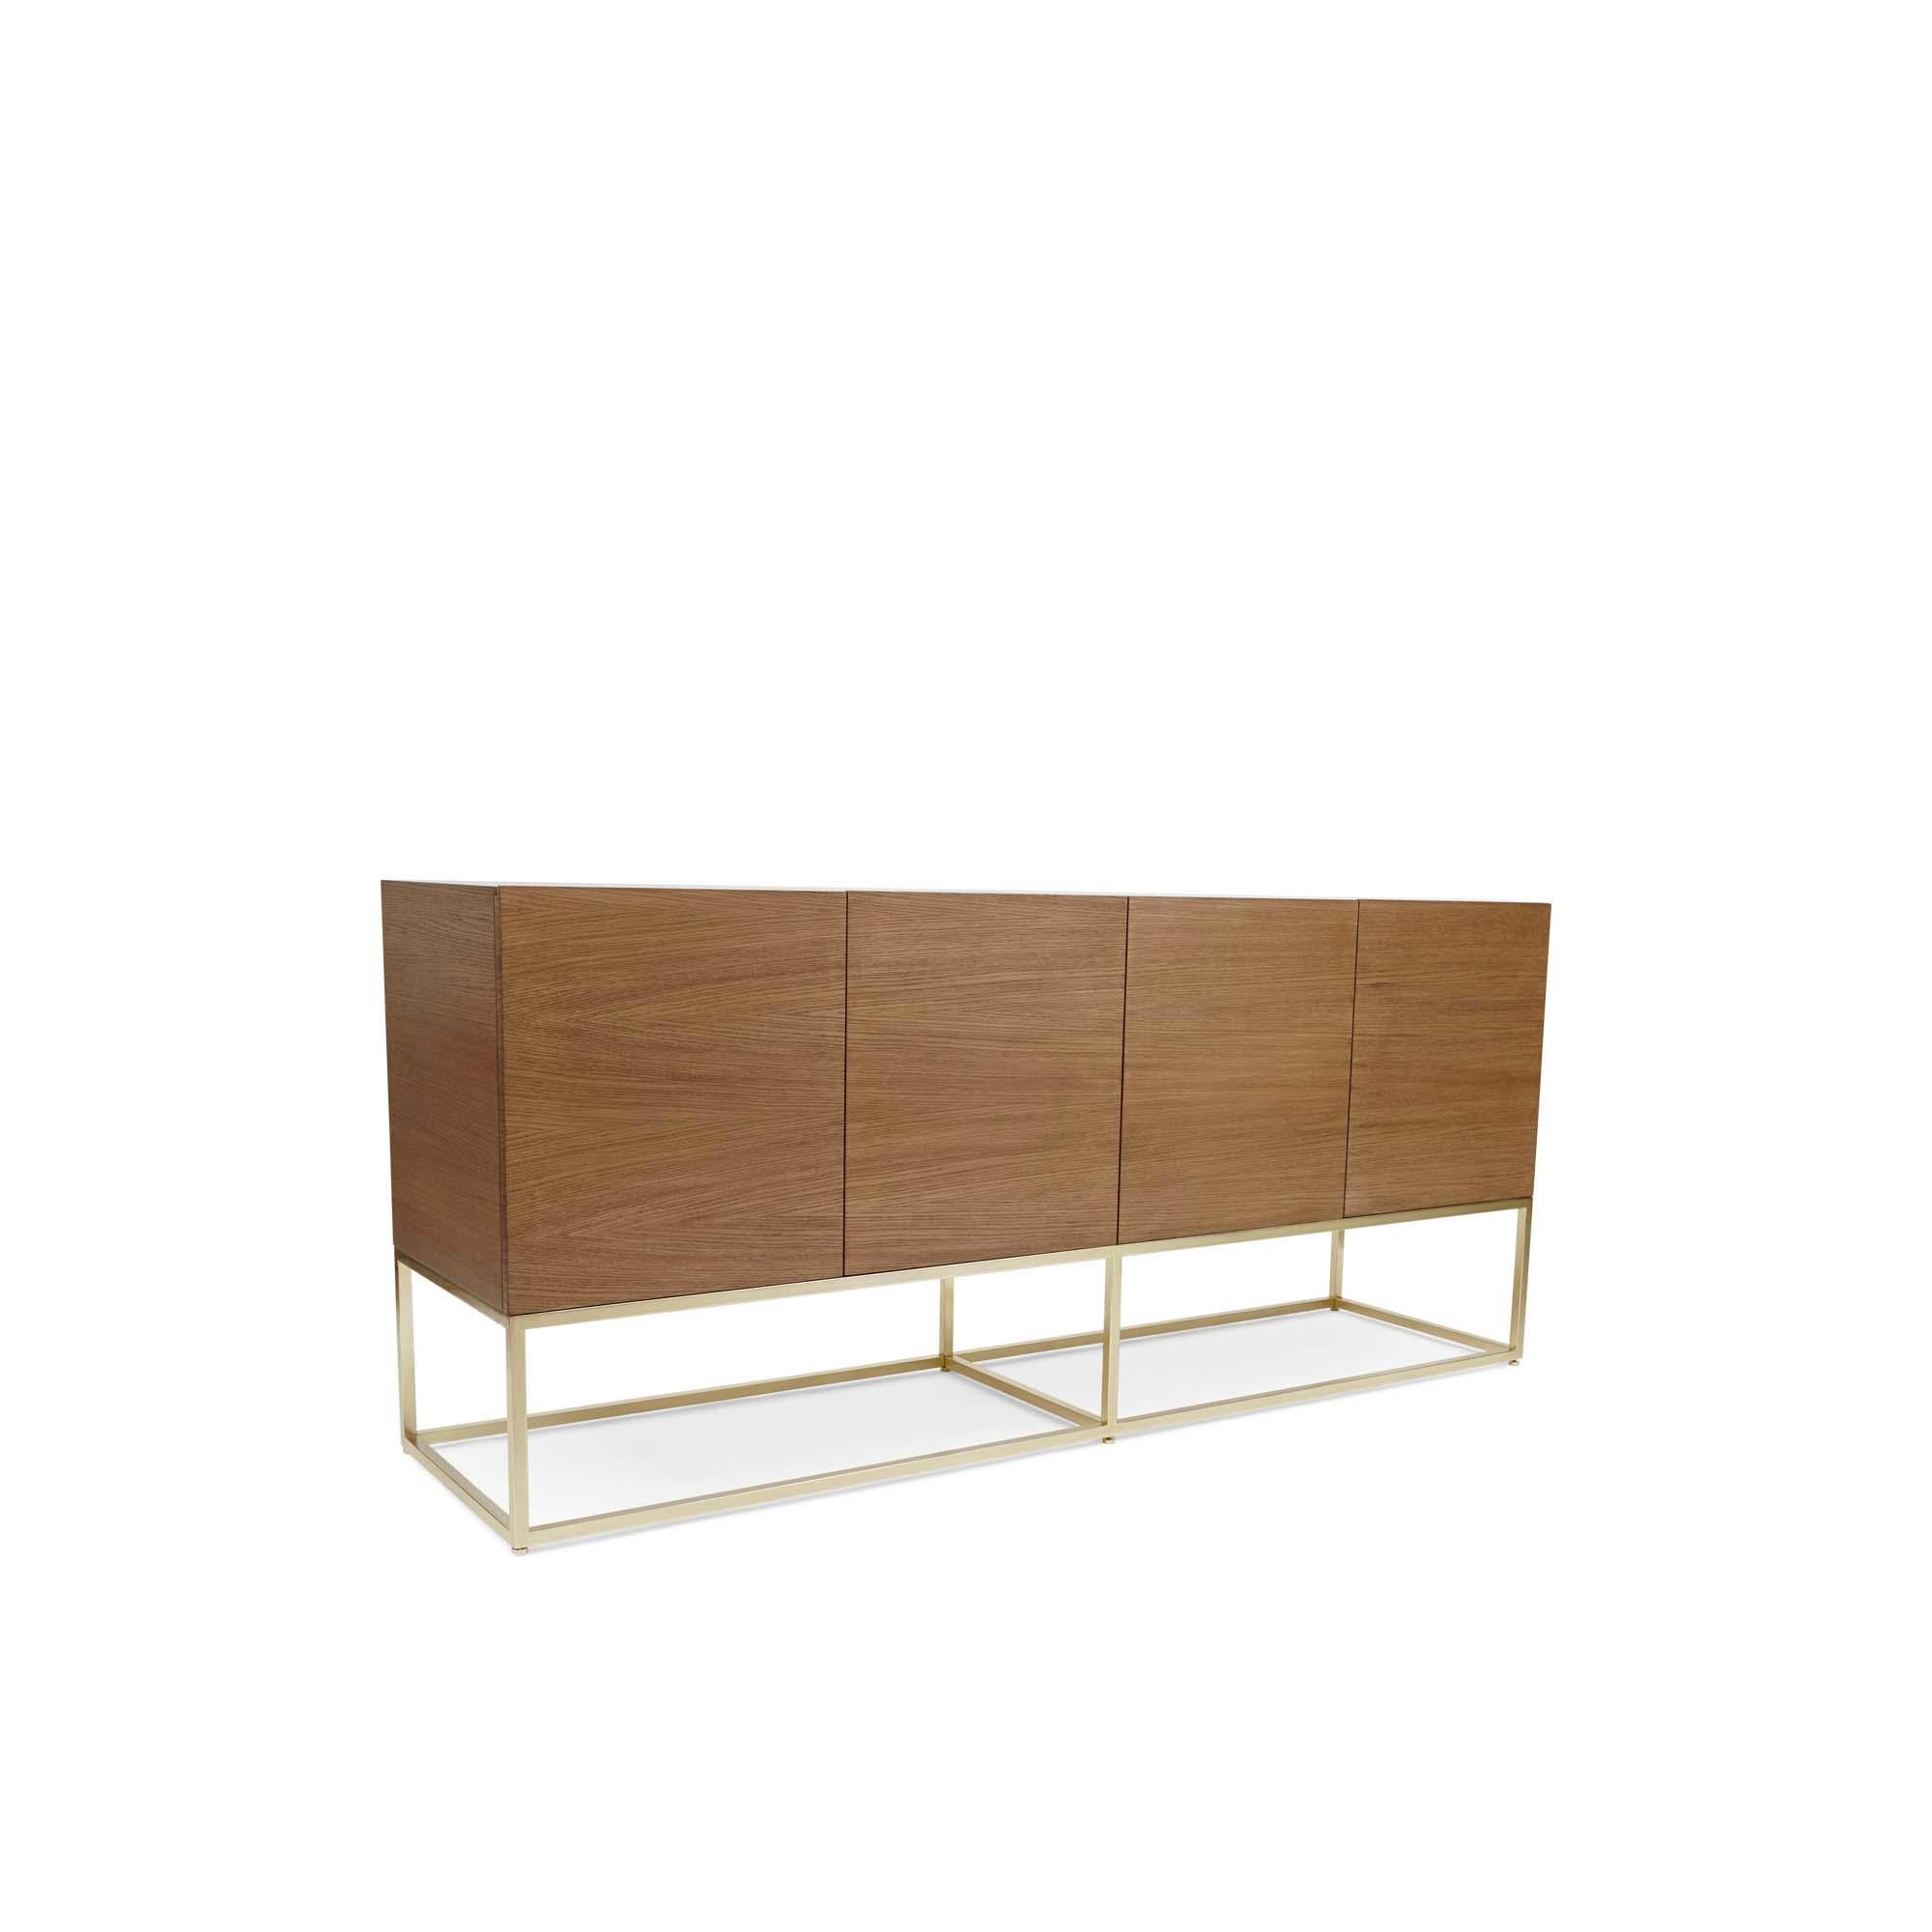 The thin frame cabinet is a four-door case piece with a thin, plated steel base. The interior includes one drawer and adjustable shelves.  

The Lawson-Fenning Collection is designed and handmade in Los Angeles, California. Reach out to discover